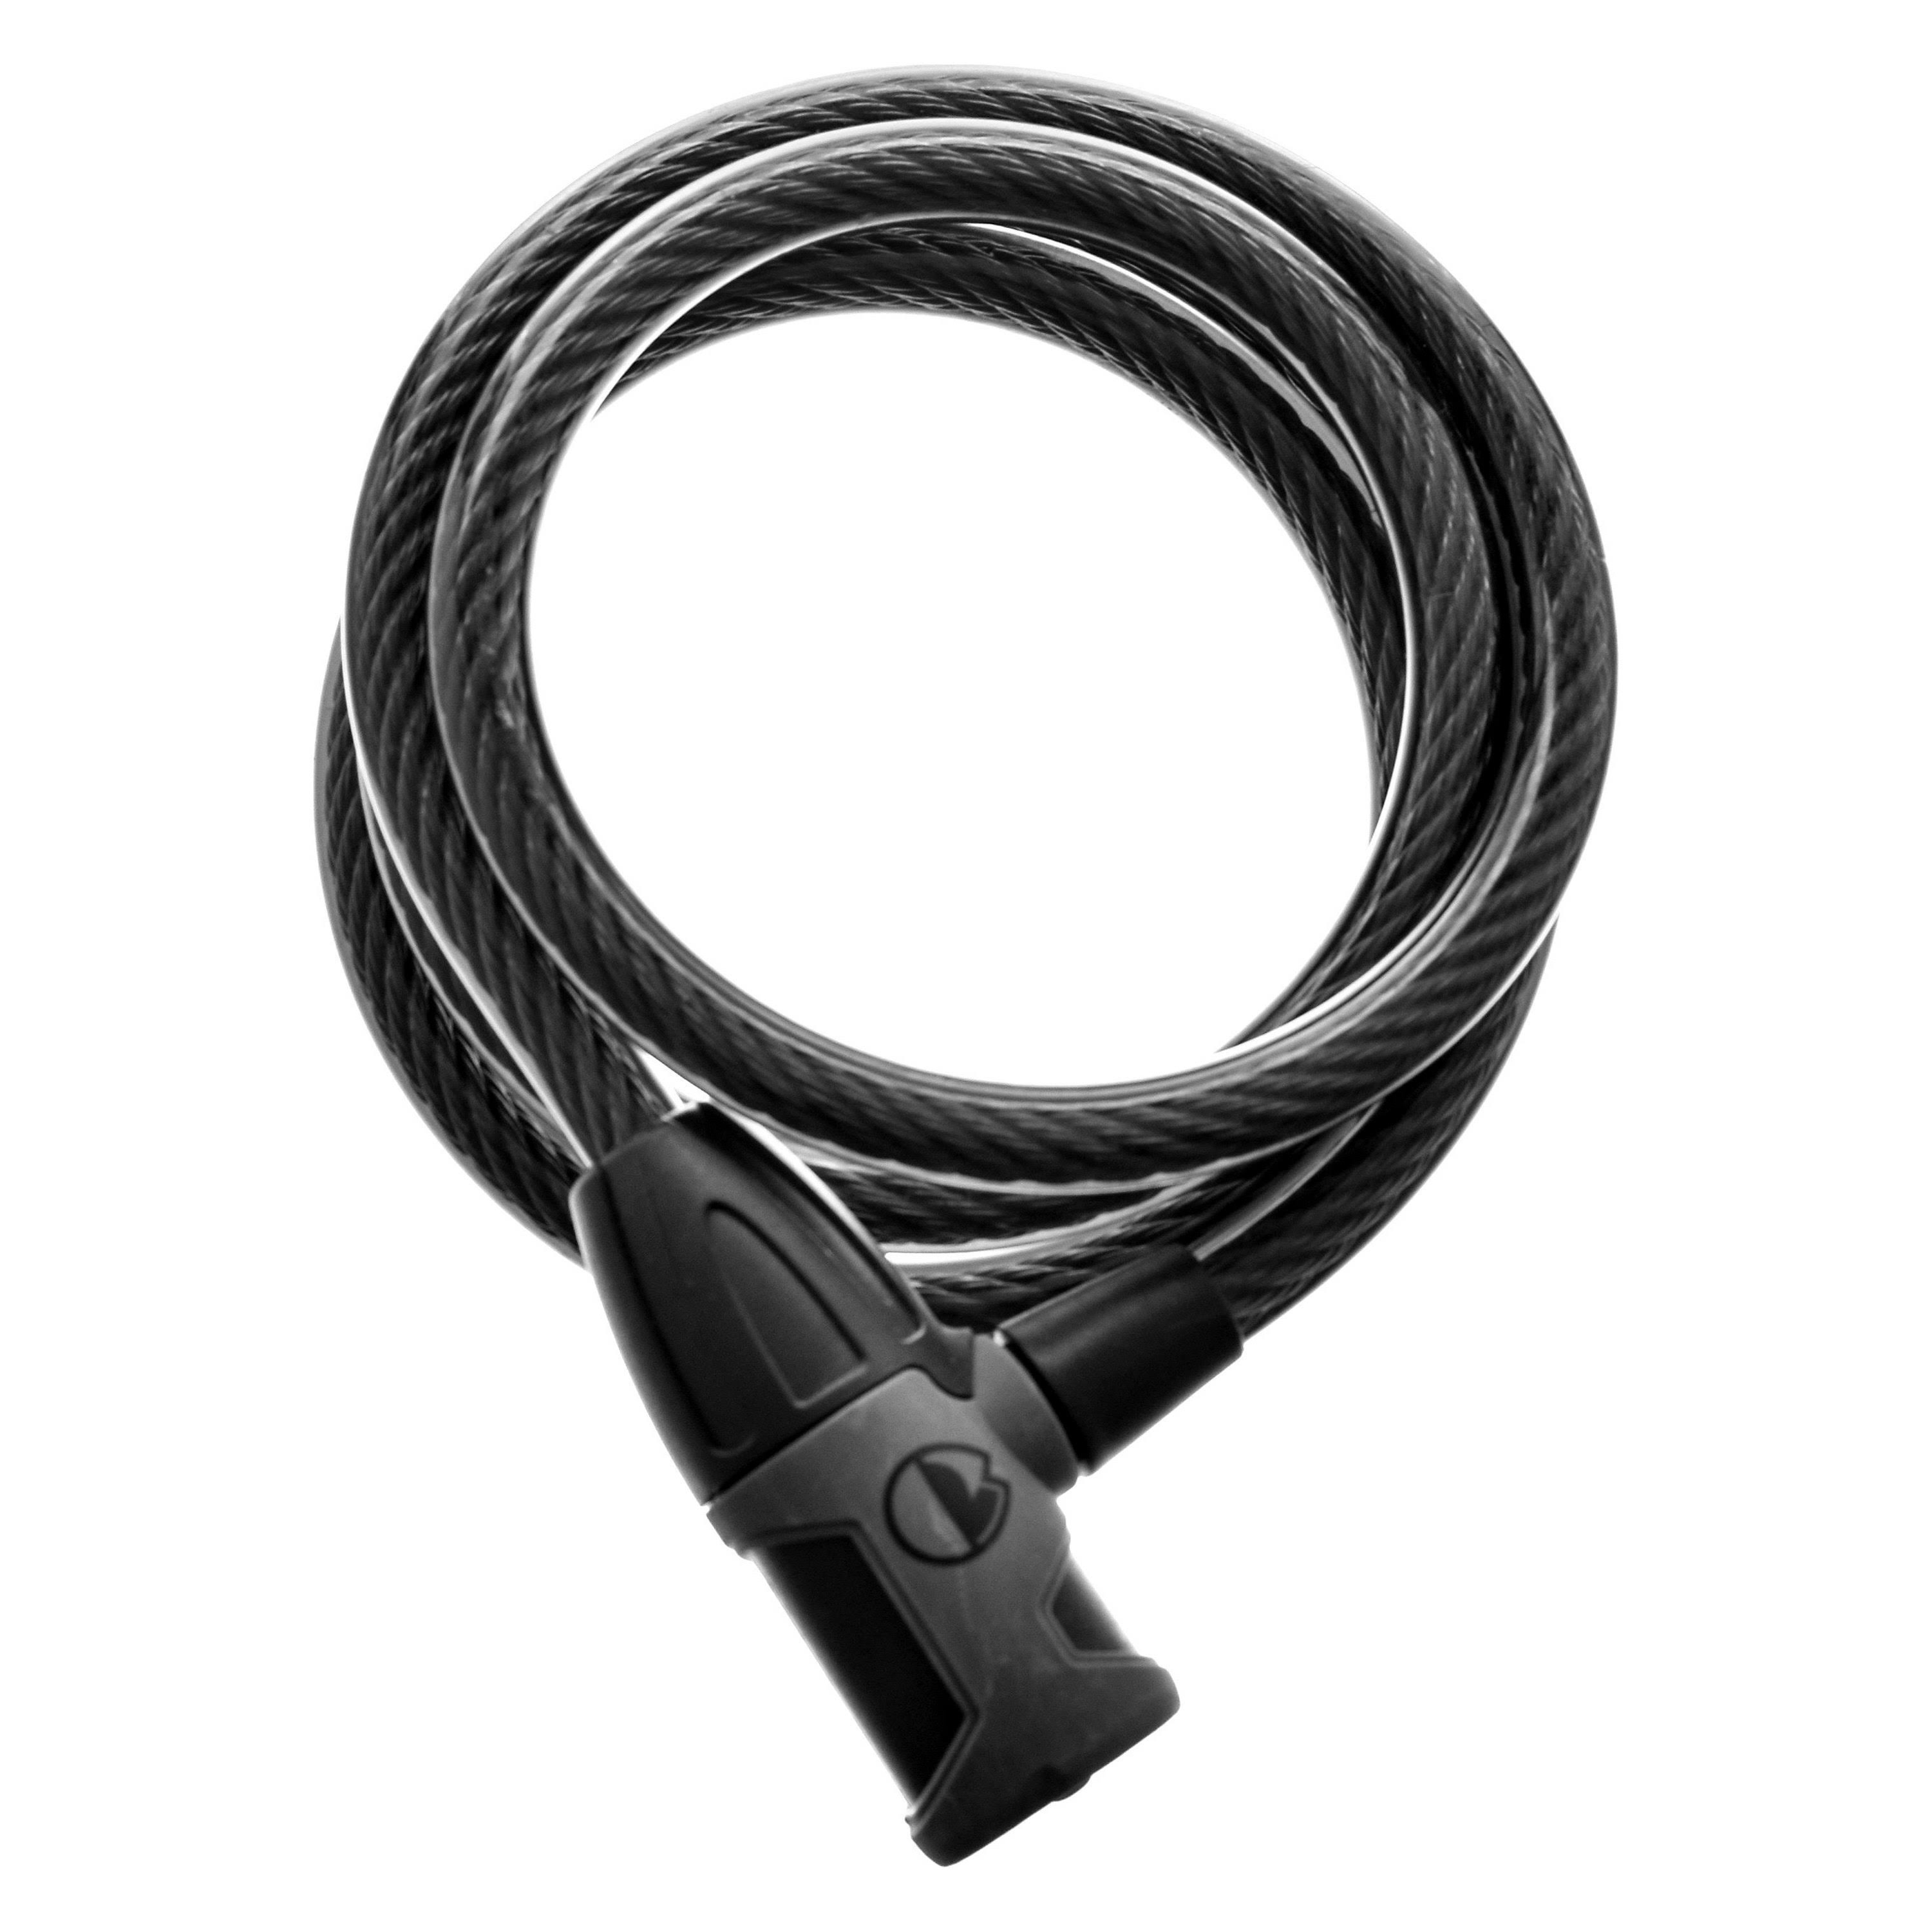 RockyMounts Five-0 Keyed Cable Bicycle Lock